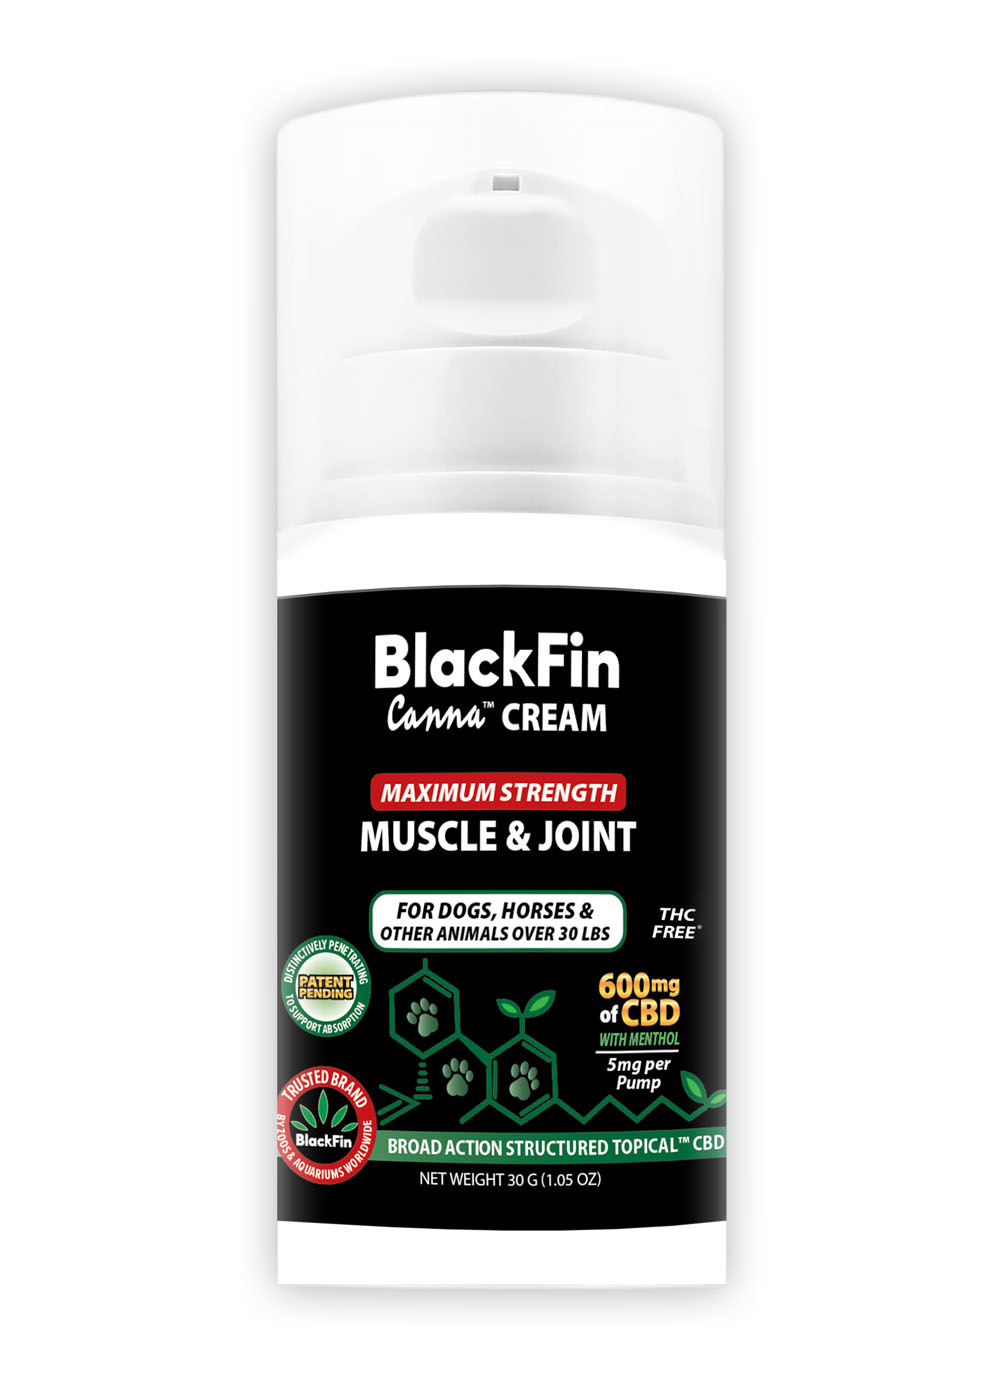 BlackFin Canna Cream Maximum Strength Muscle and Joint - 600mg of CBD